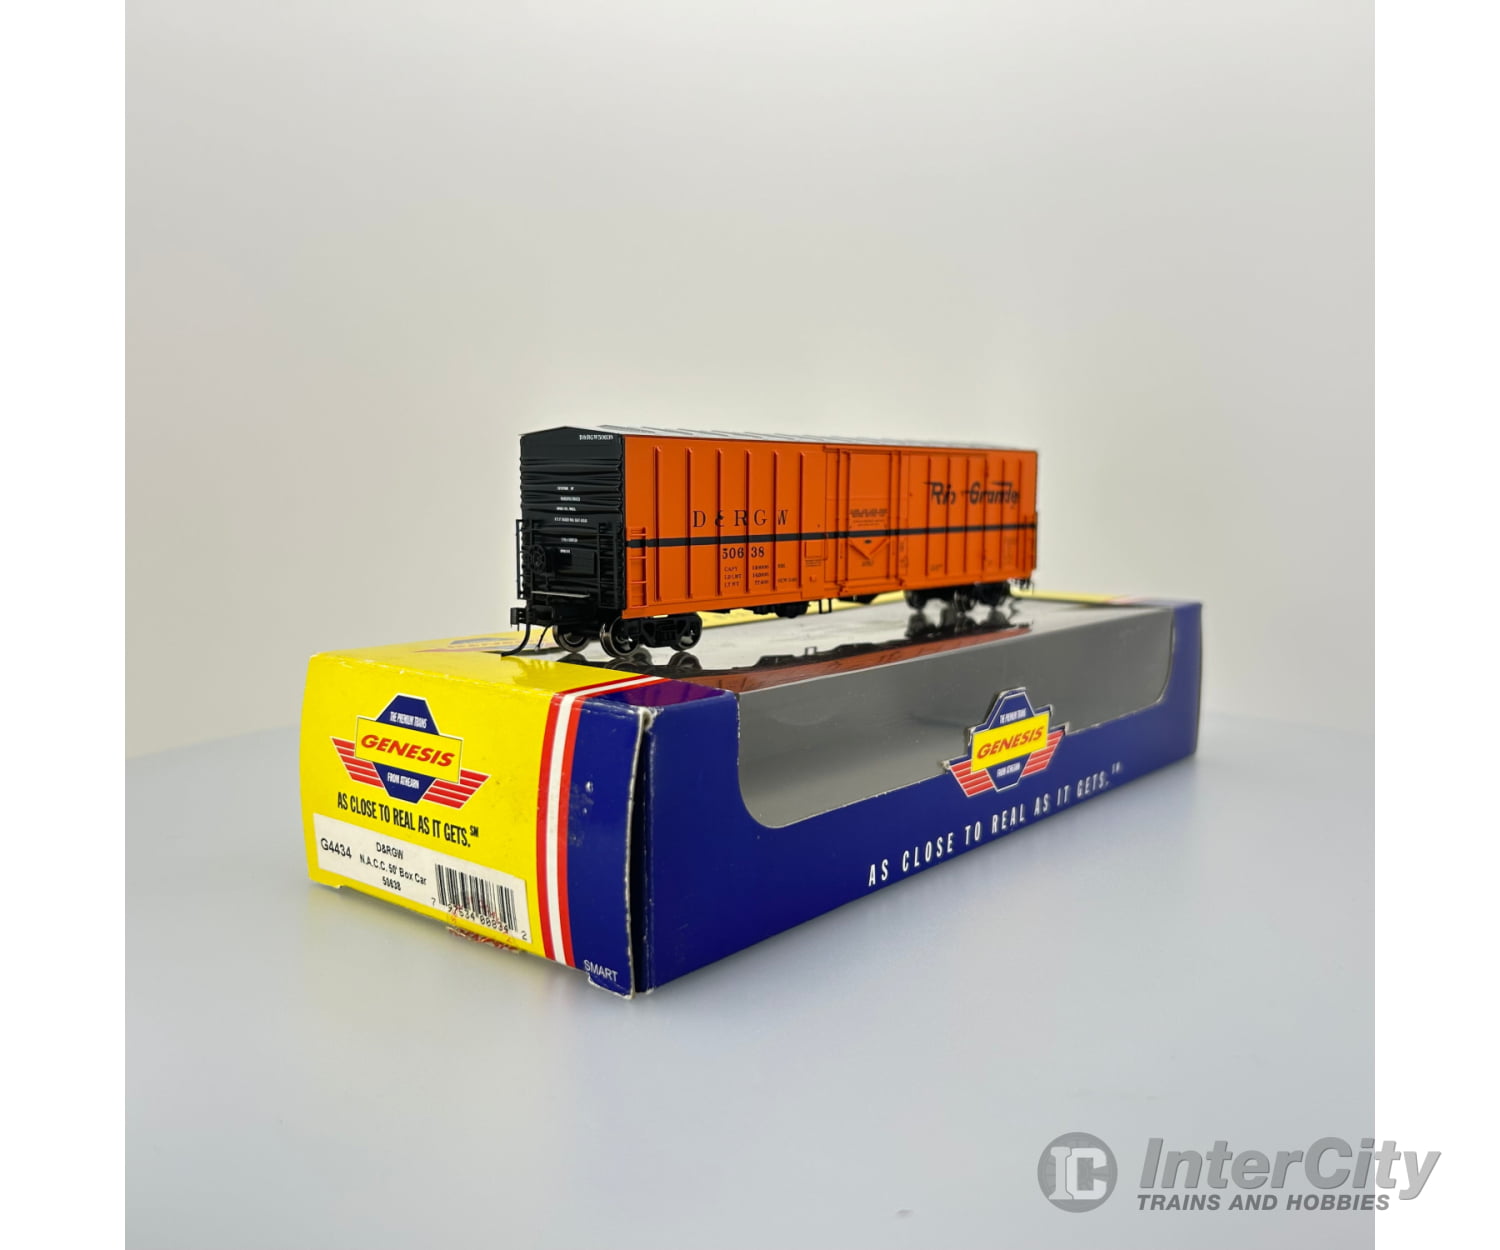 Athearn Ic-Ath-G4434 Ho N.a.c.c. 50 Single Door Boxcar D&Rgw 50638 Freight Cars